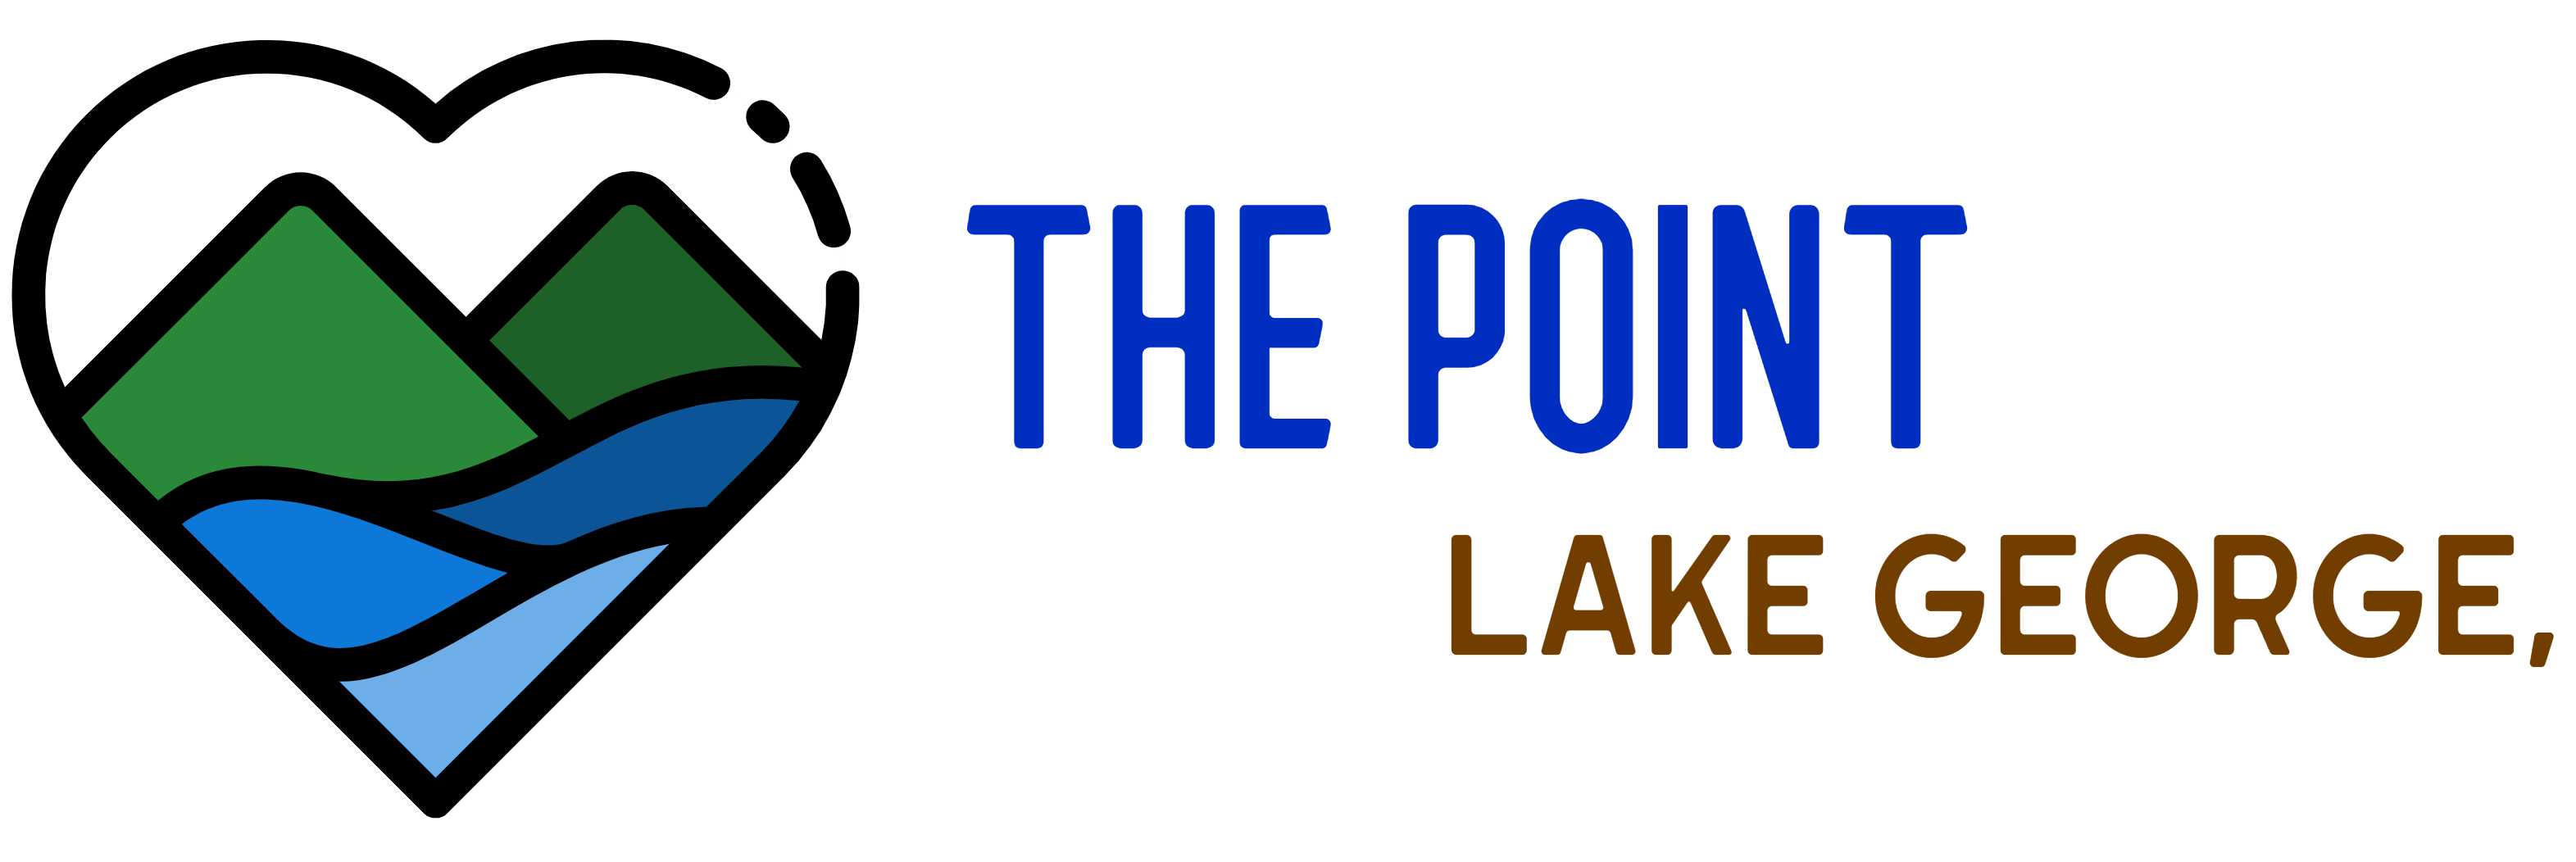 The Point Lake George heart logo